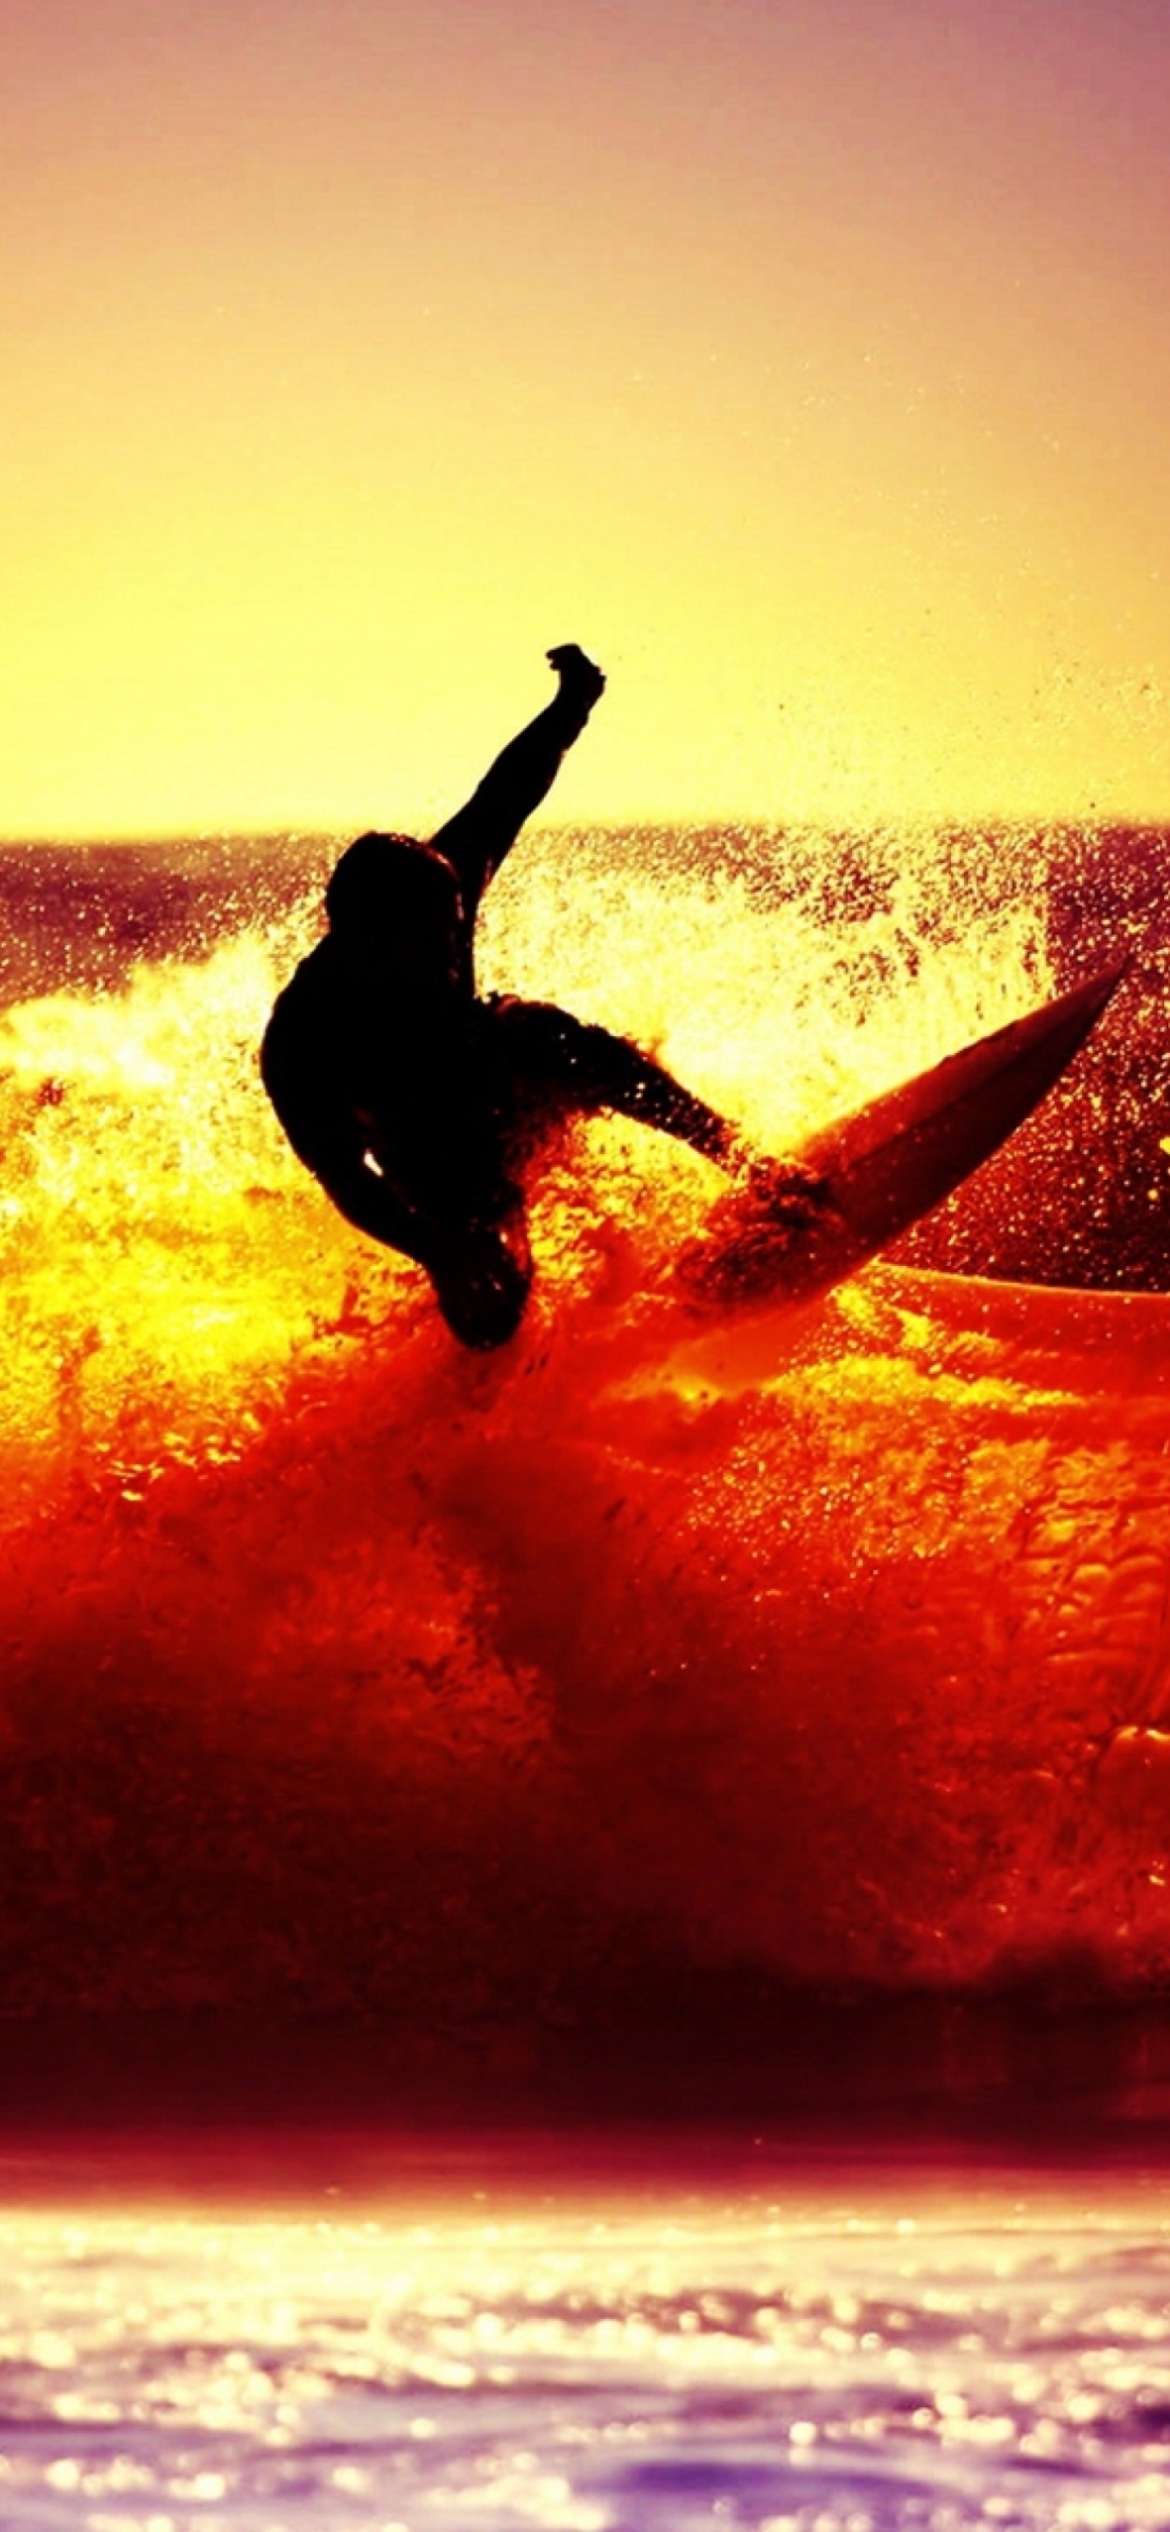 Surfing At Sunset wallpaper 1170x2532